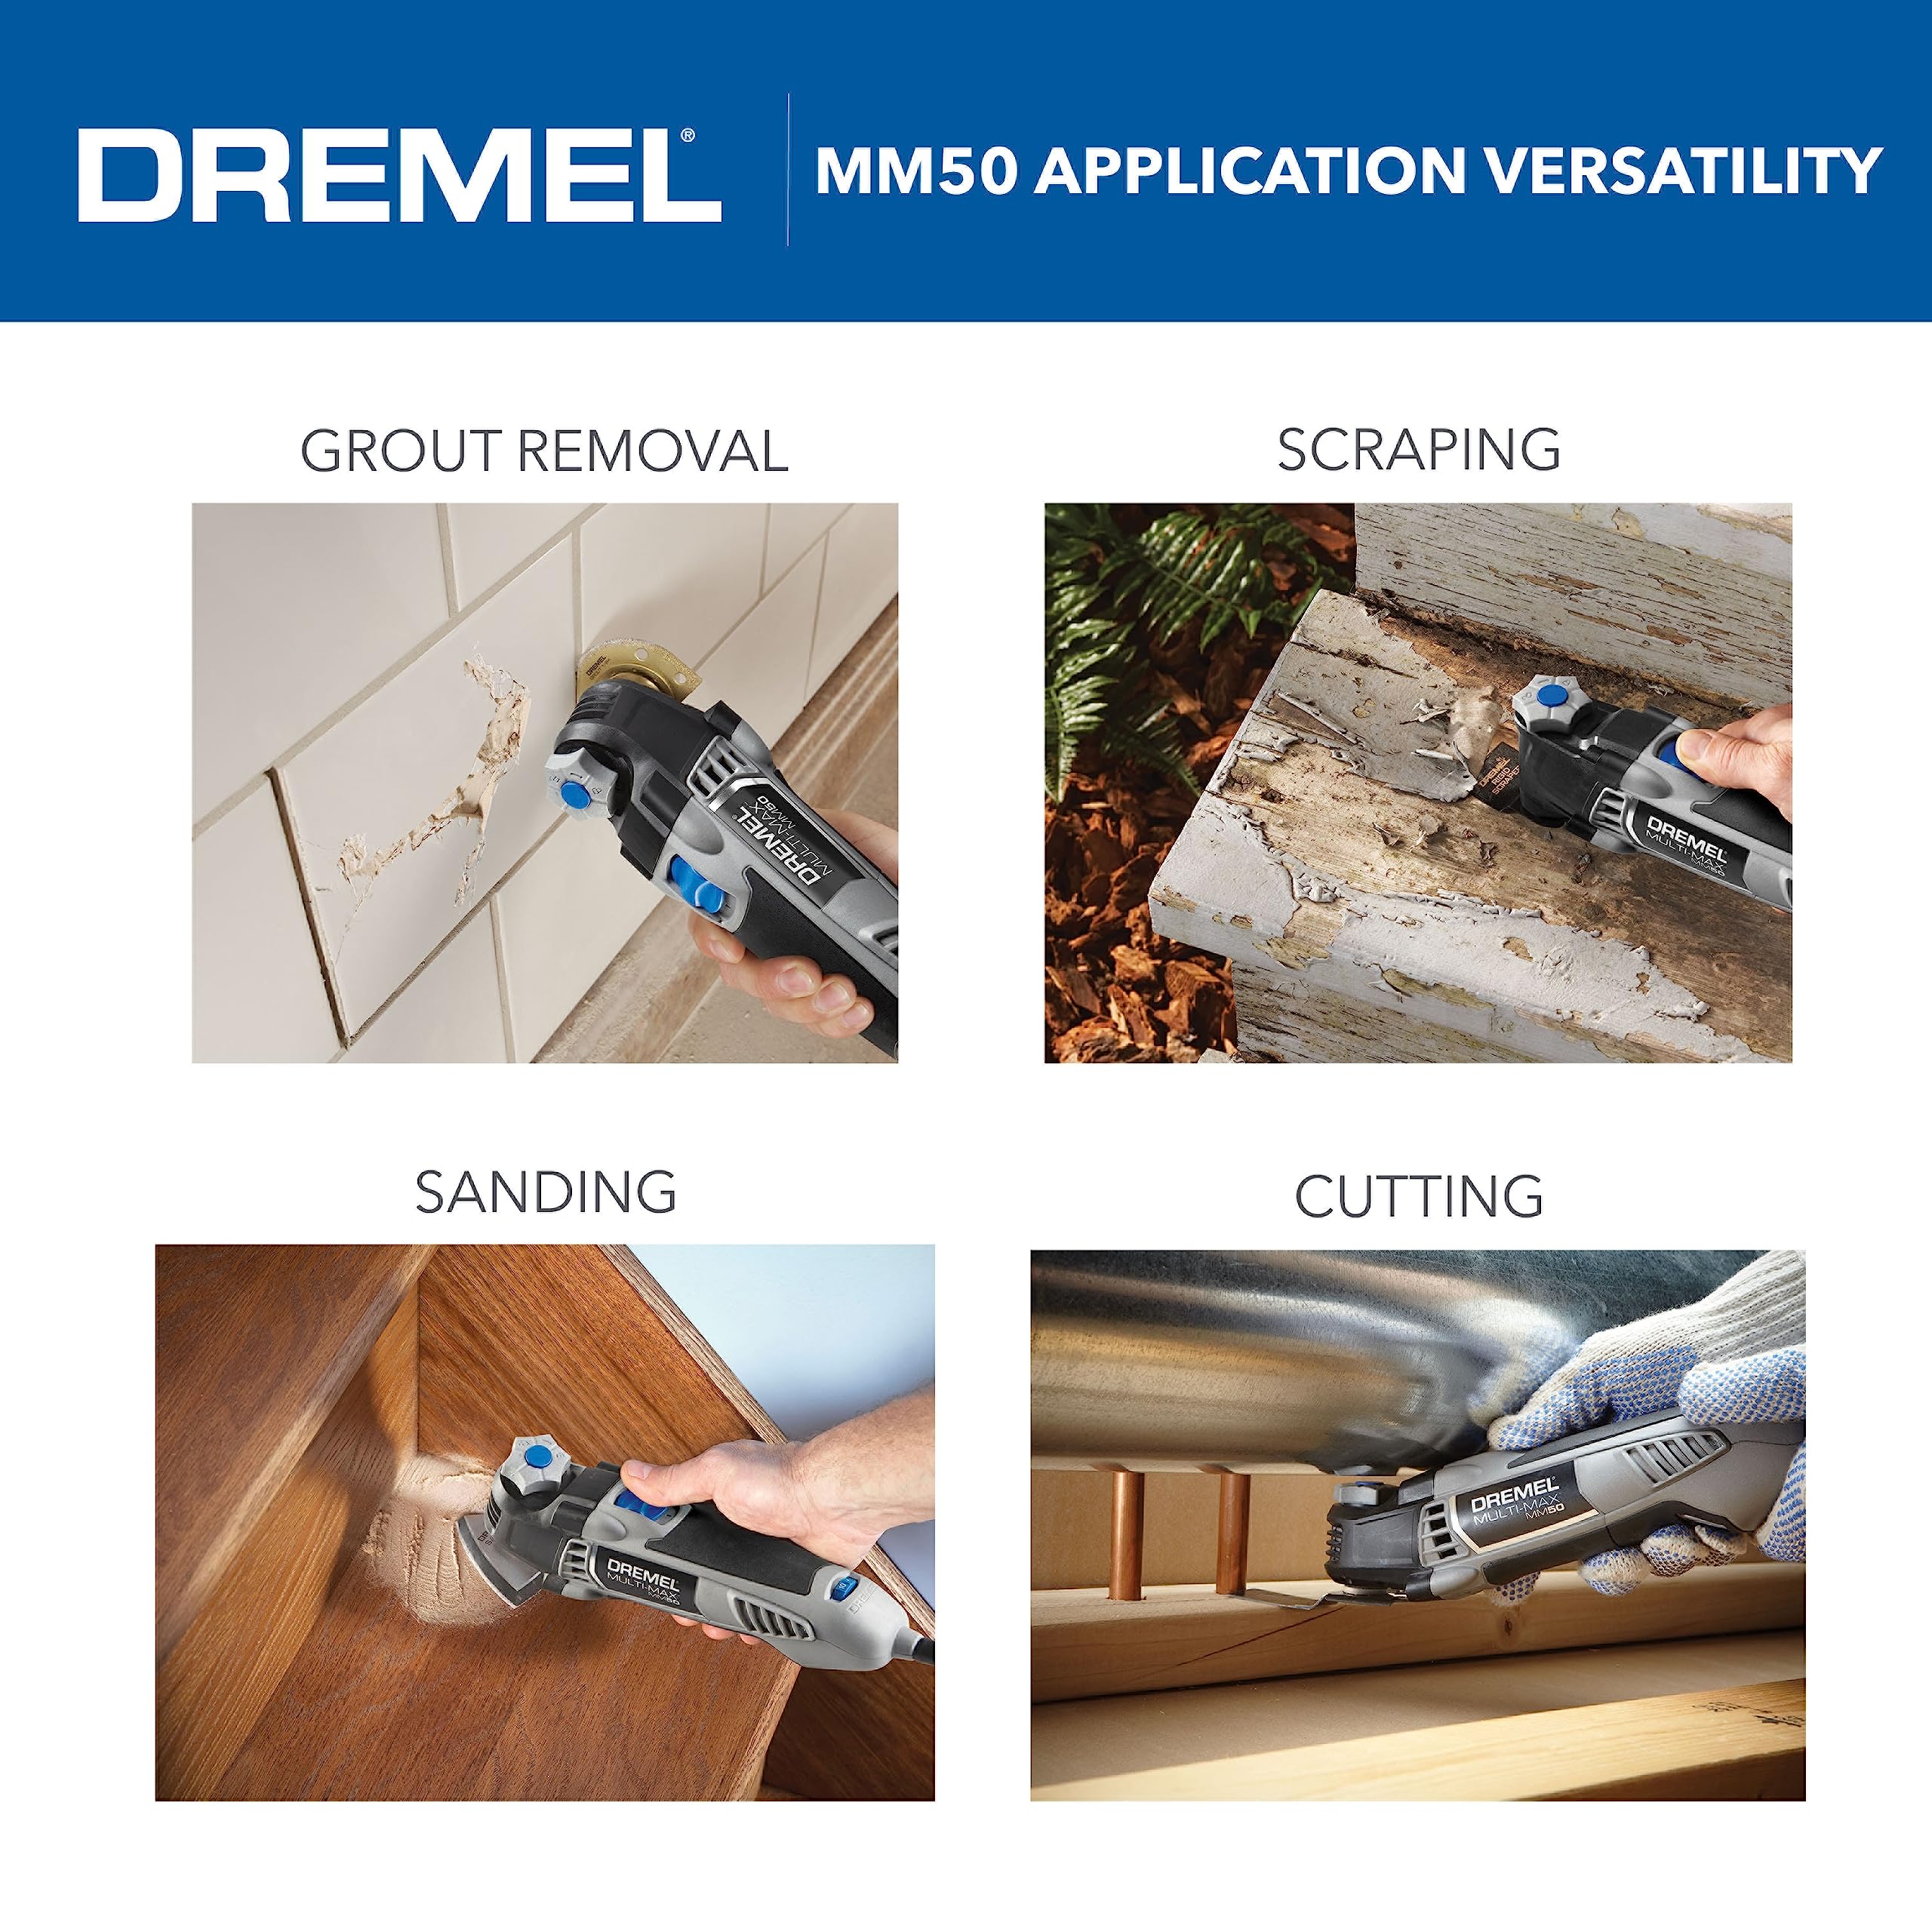 Dremel MM50-01 Multi-Max Oscillating DIY Tool Kit with Tool-LESS Accessory Change- 5 Amp, 30 Accessories- Compact Head & Angled Body- Drywall, Nails, Remove Grout & Sanding, 17.2 x 4.2 x 10.5"`